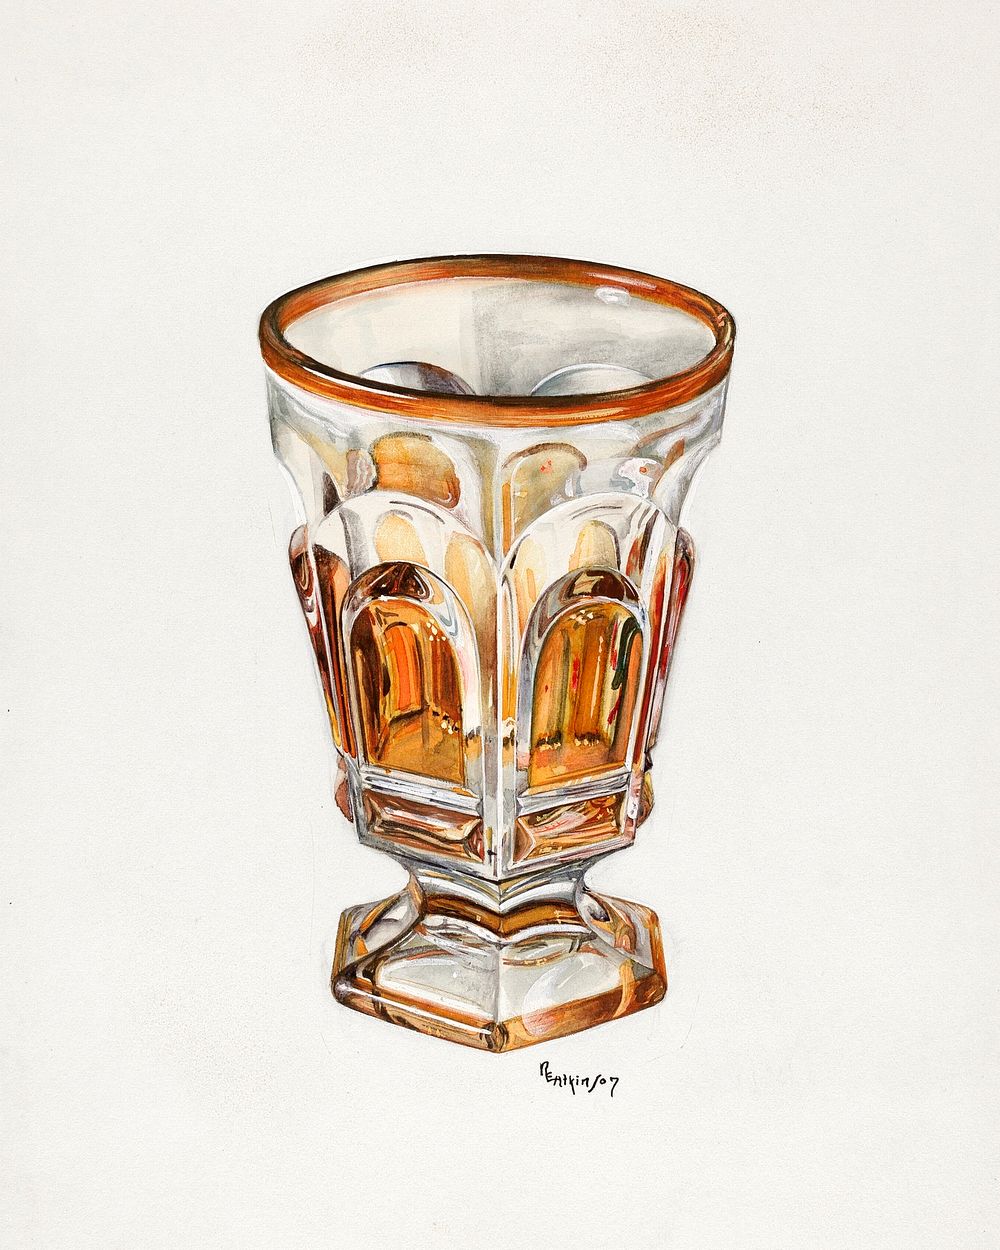 Footed Tumbler (ca. 1936) by Ralph Atkinson. Original from The National Gallery of Art. Digitally enhanced by rawpixel.